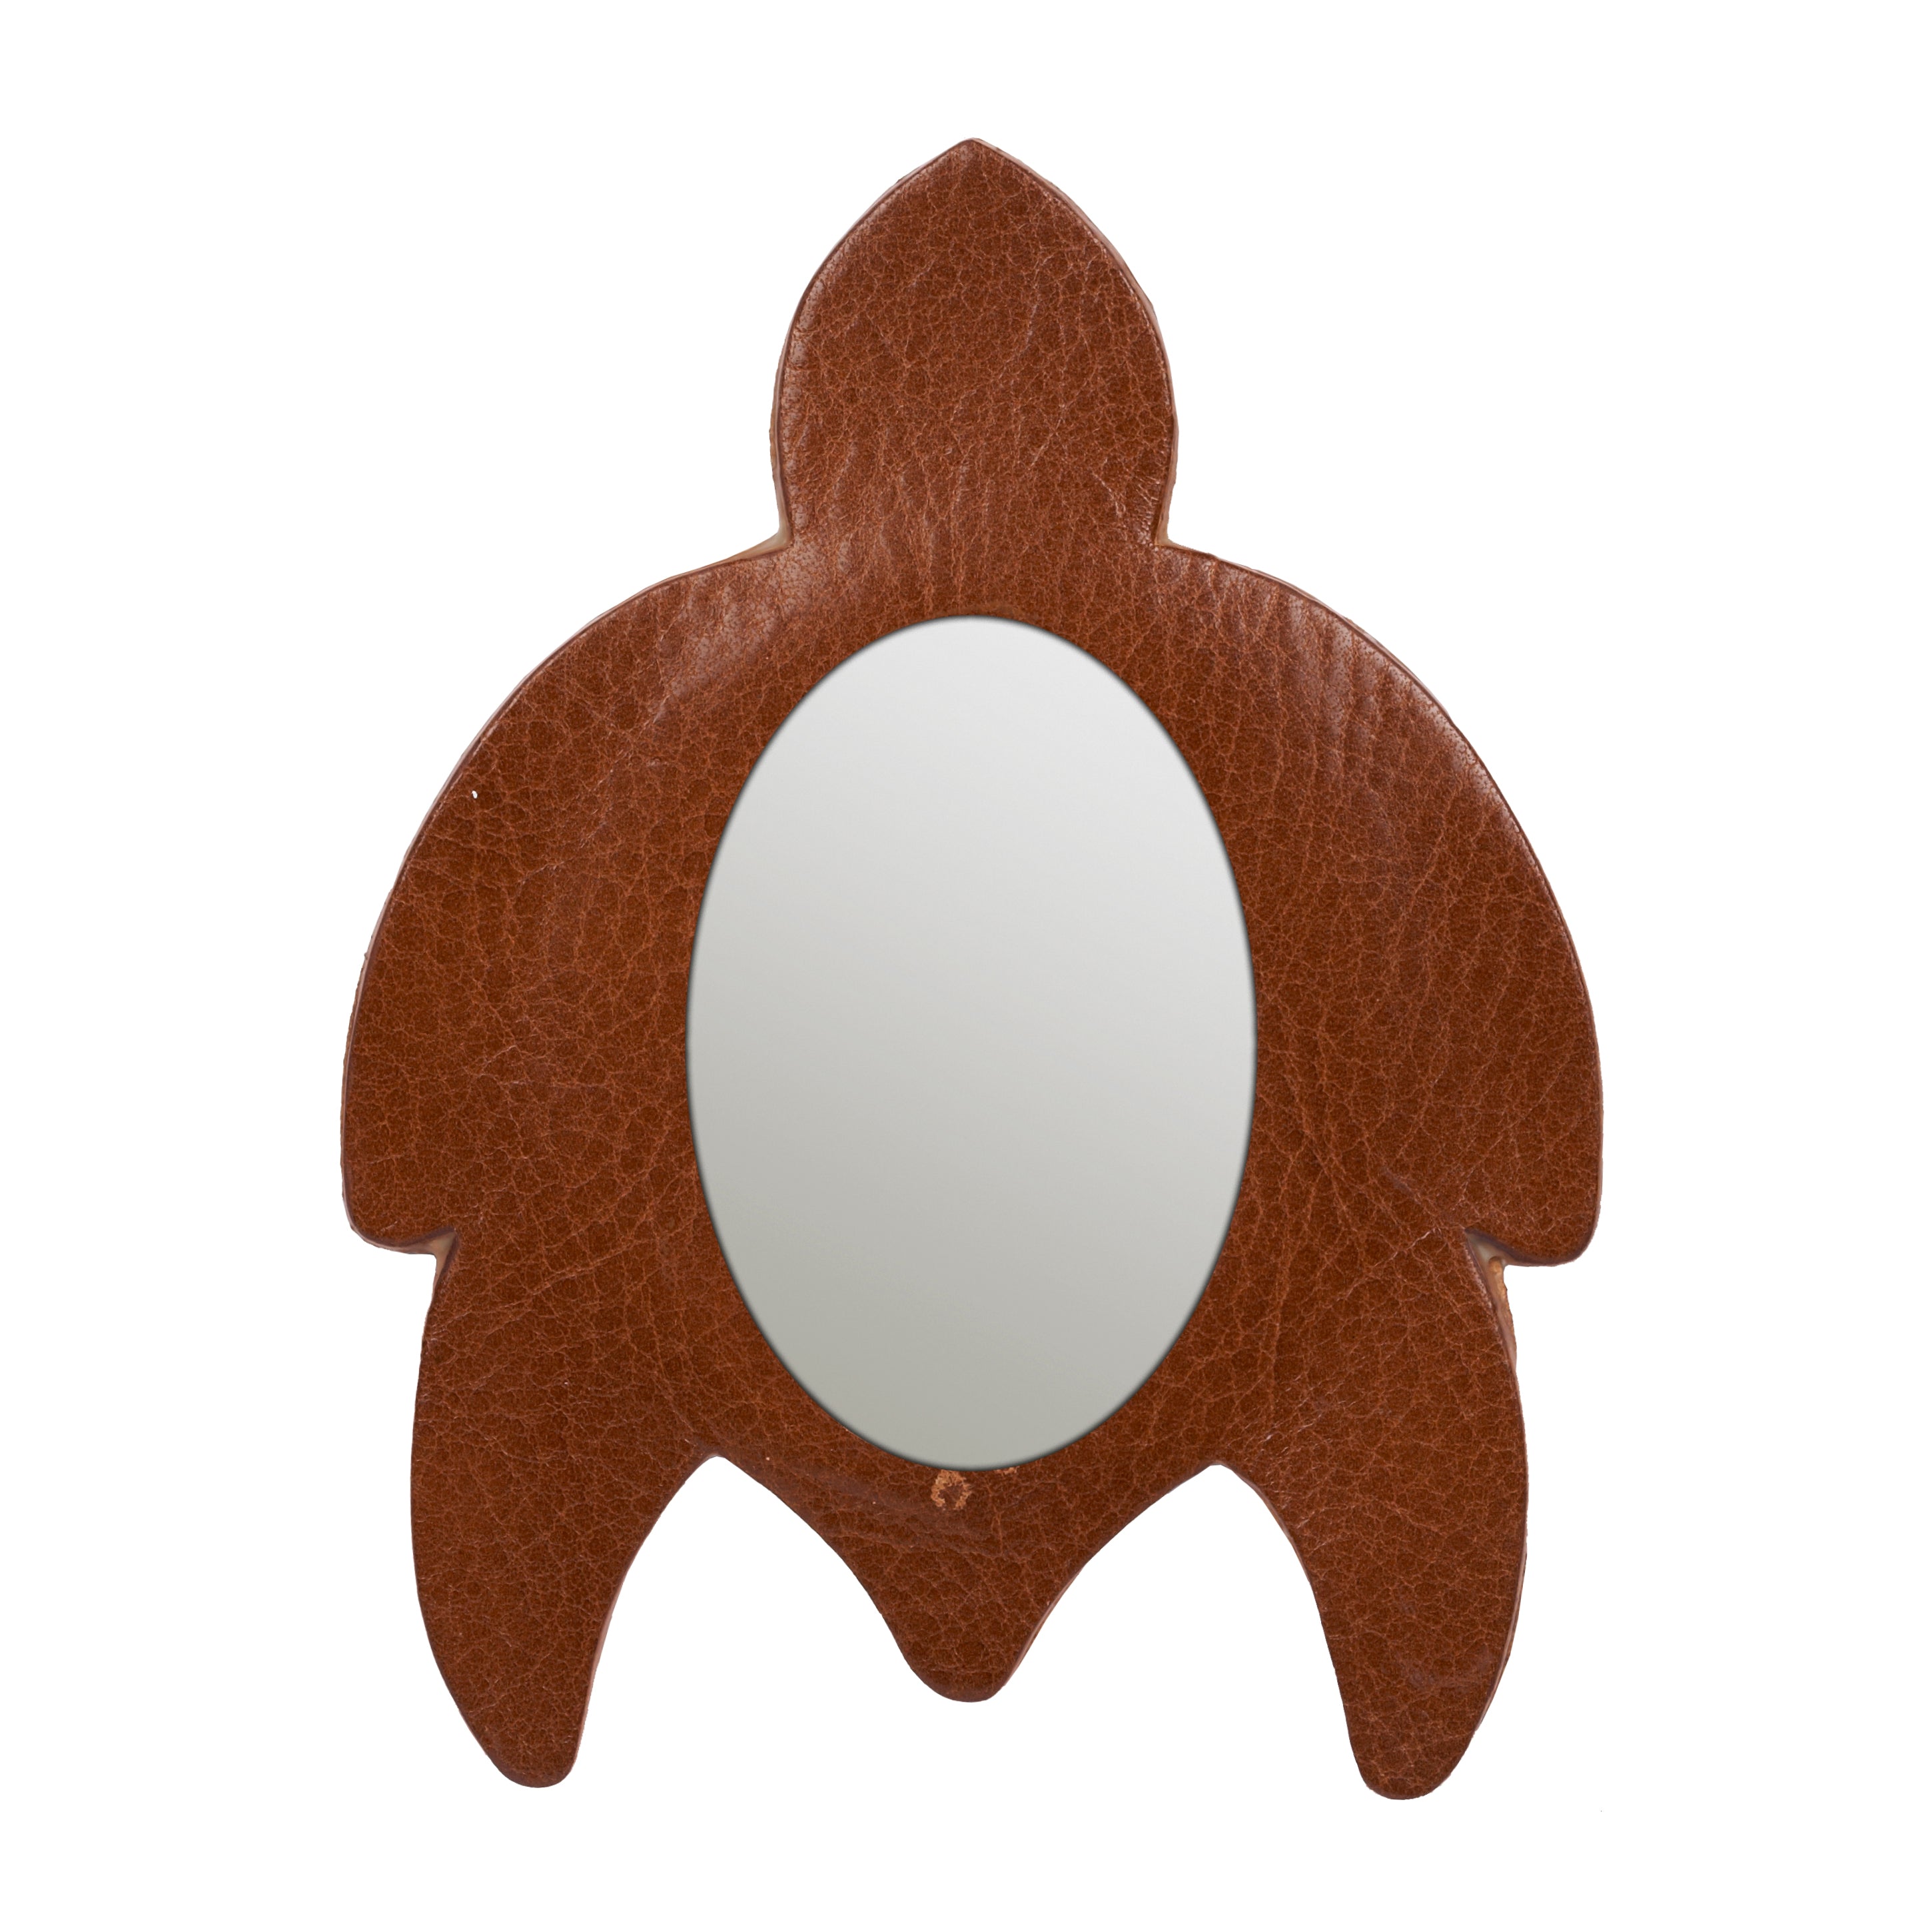 THE LUXAC SIGNATURE TURTLE HAND MIRROR